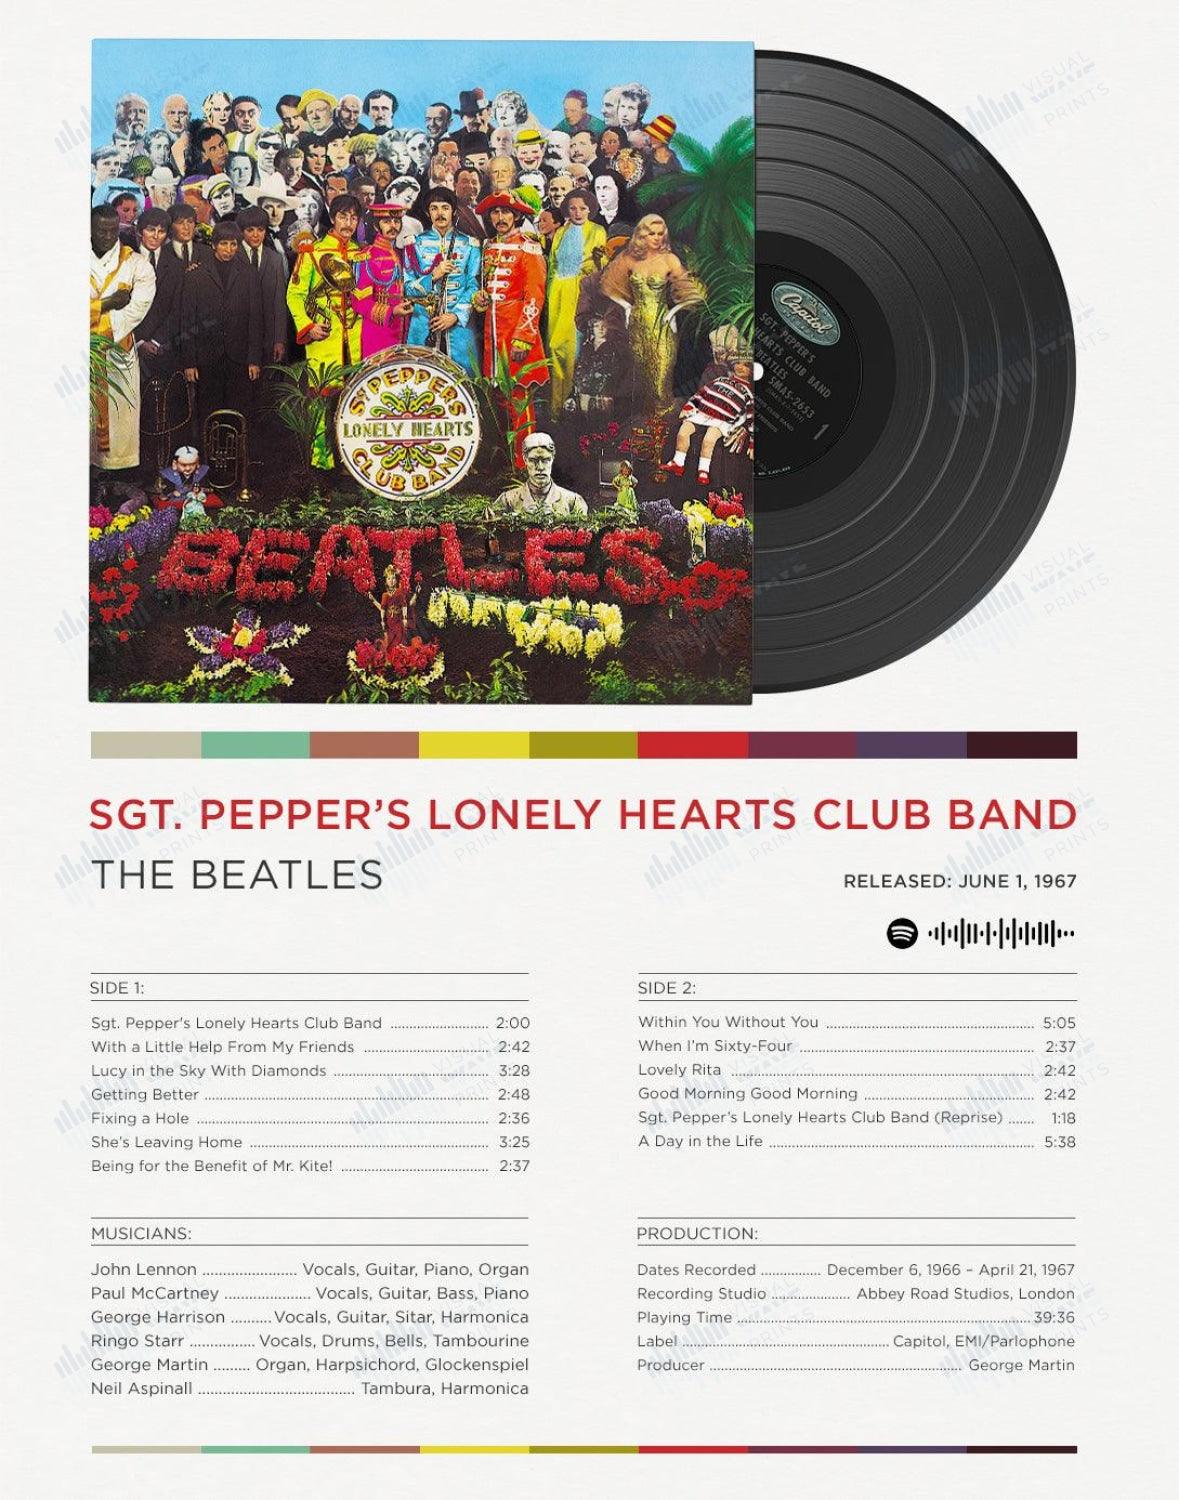 Album Art: Sgt. Pepper's Lonely Hearts Club Band  by The Beatles - Visual Wave Prints